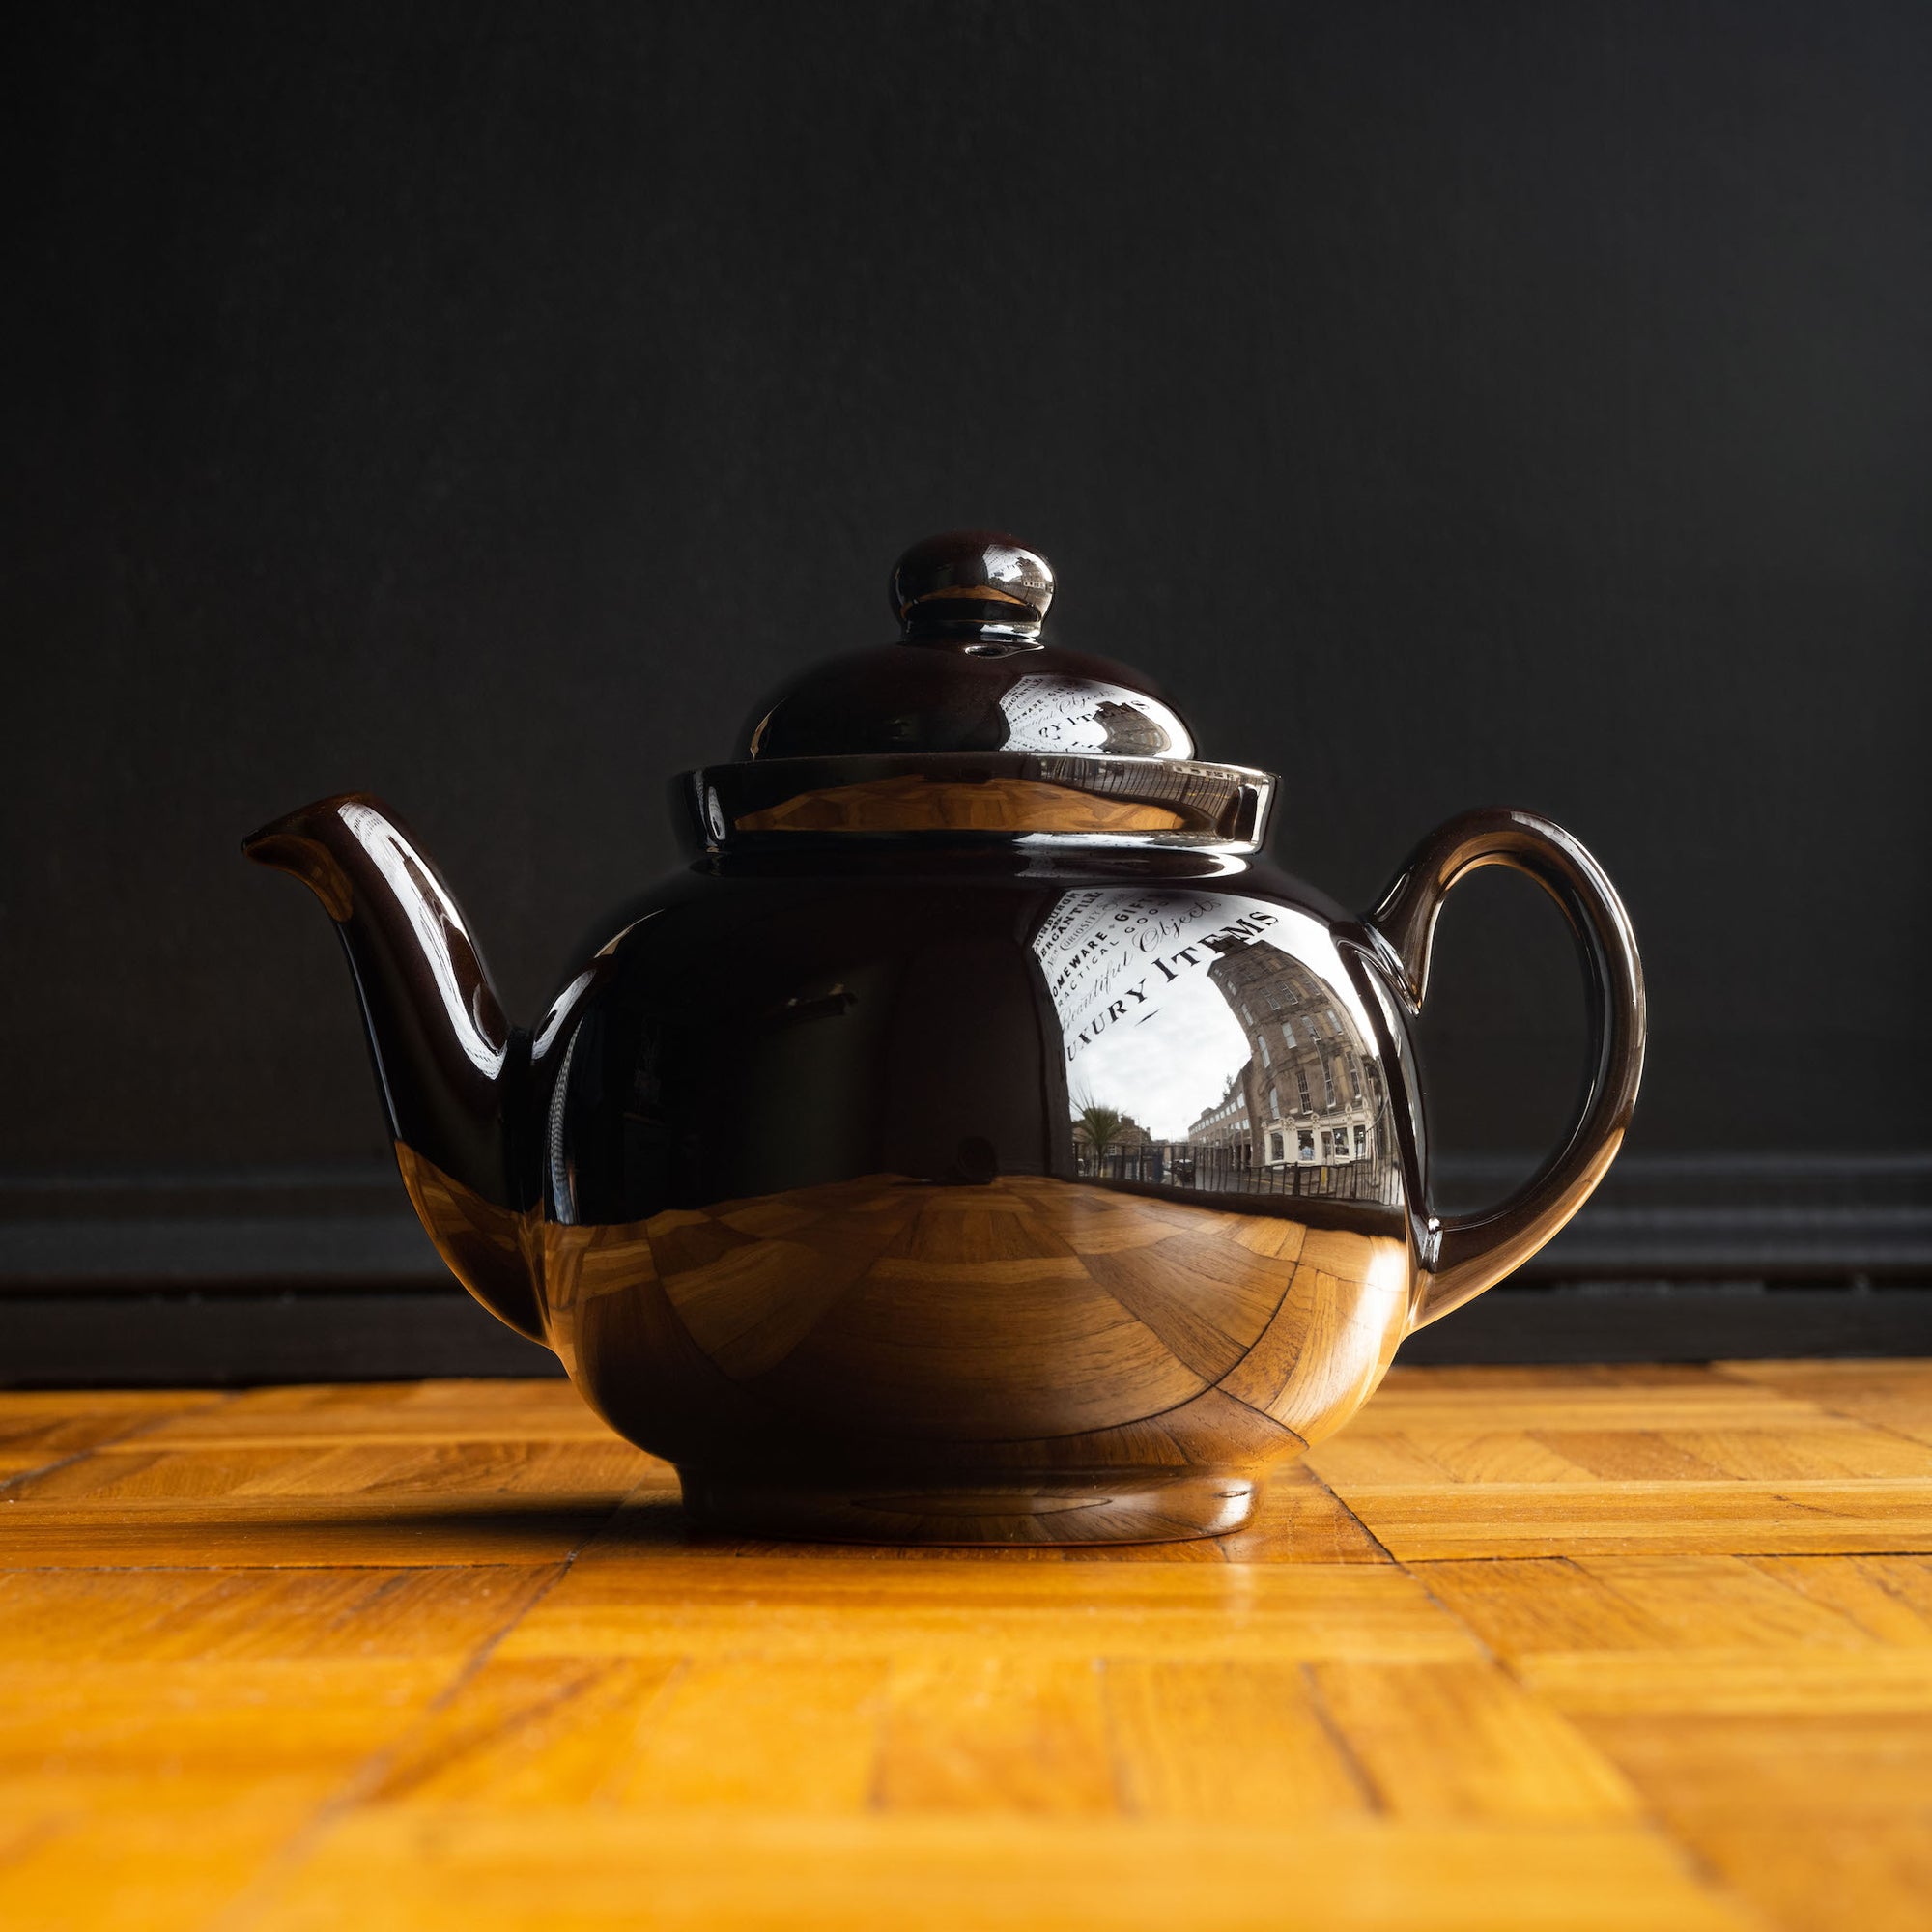 Brown Betty teapot 4 cup size